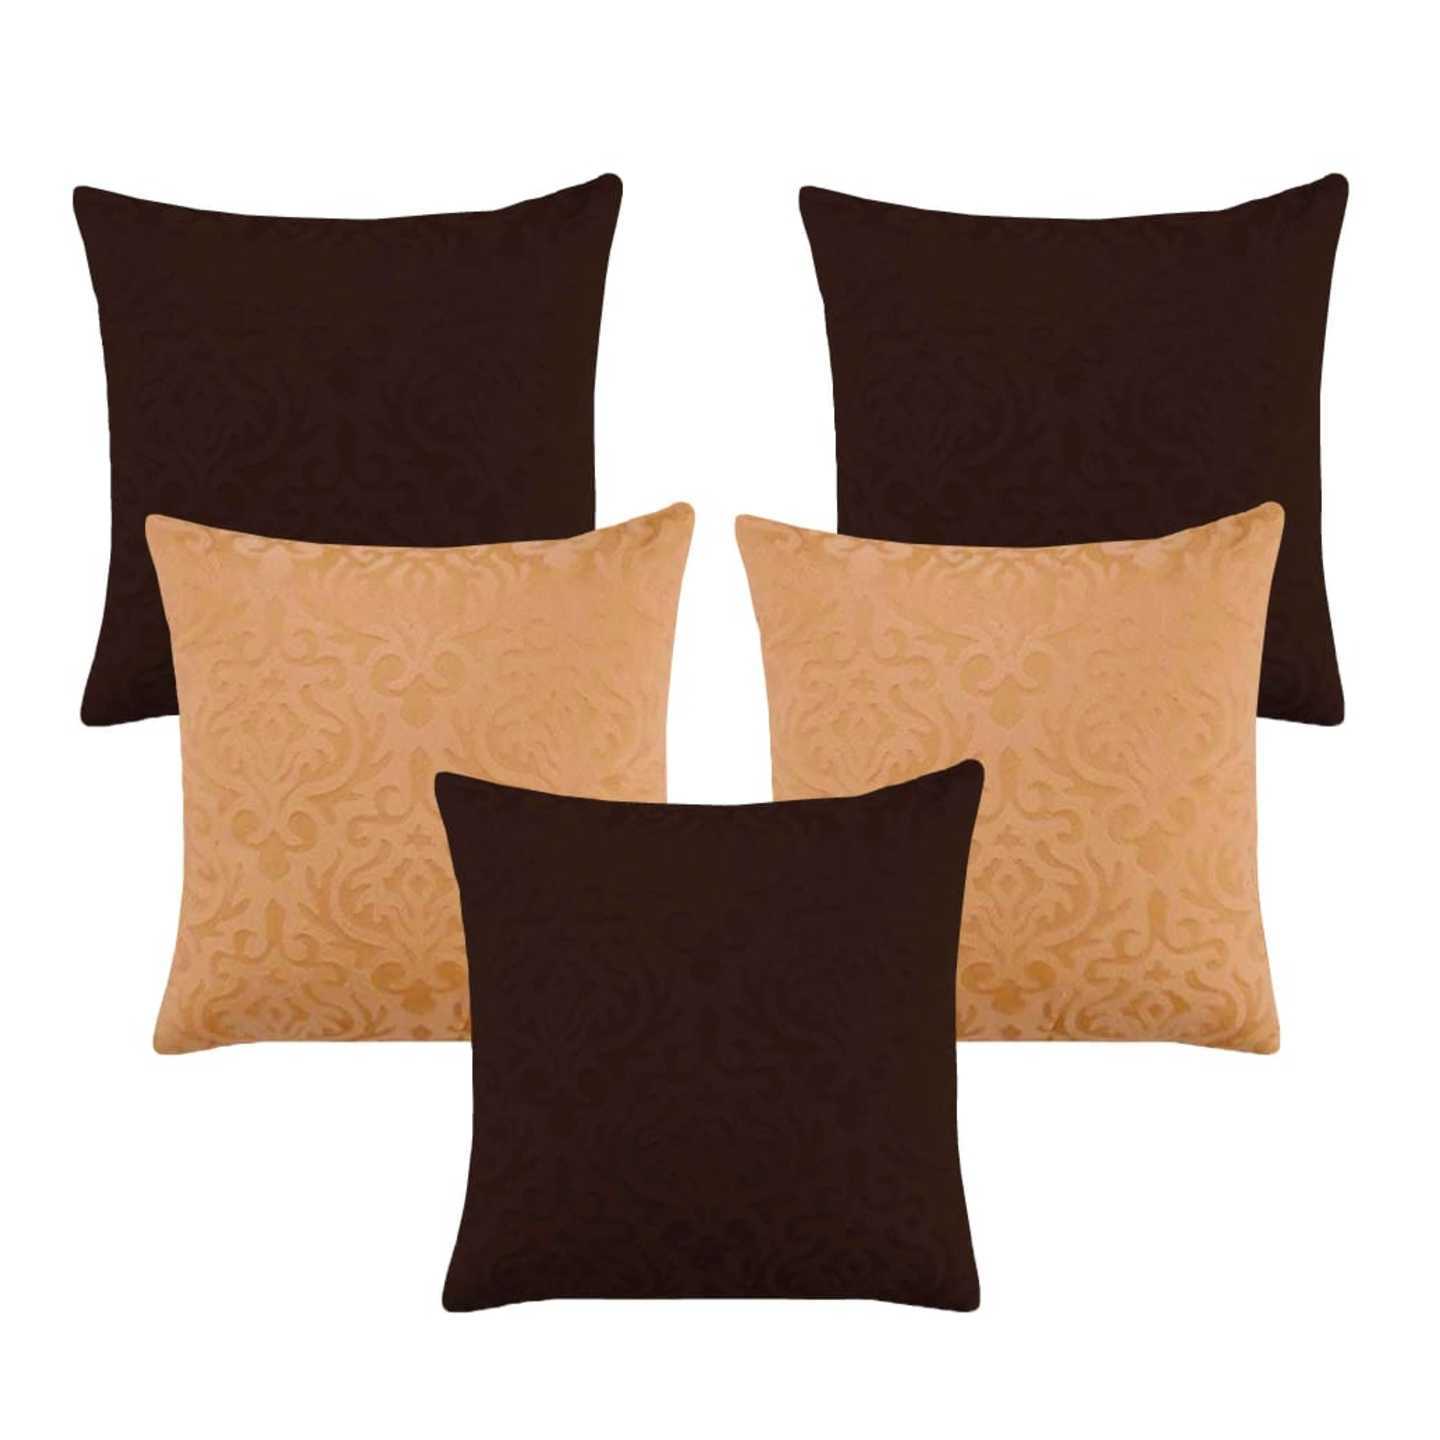 Handtex Home Velvet Cushion Covers 40.64x40.64 cm16x16 inches, Multicolour - Set of 5 Coffee - Camel